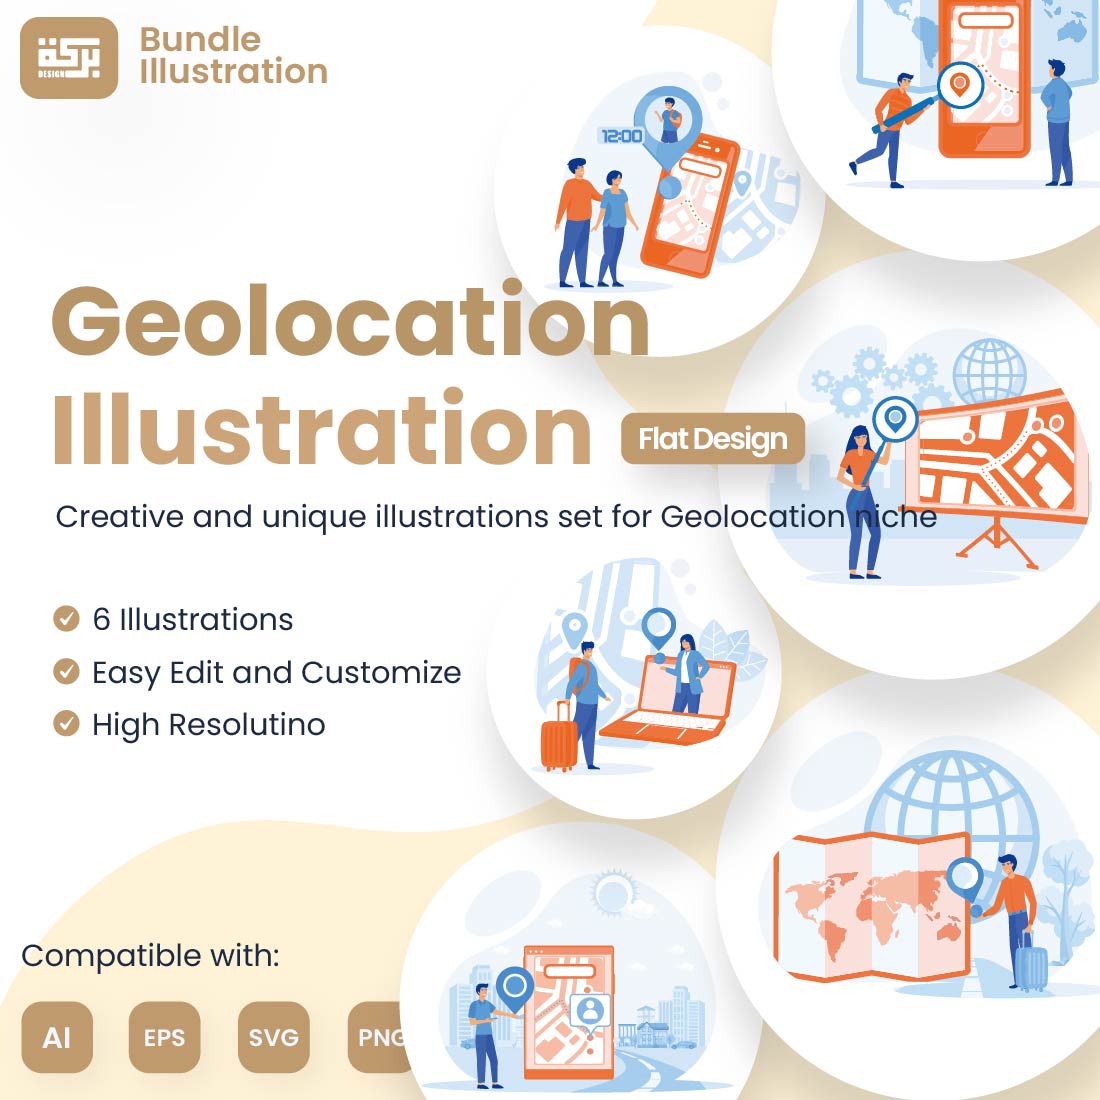 Design Illustration of Geolocation cover image.